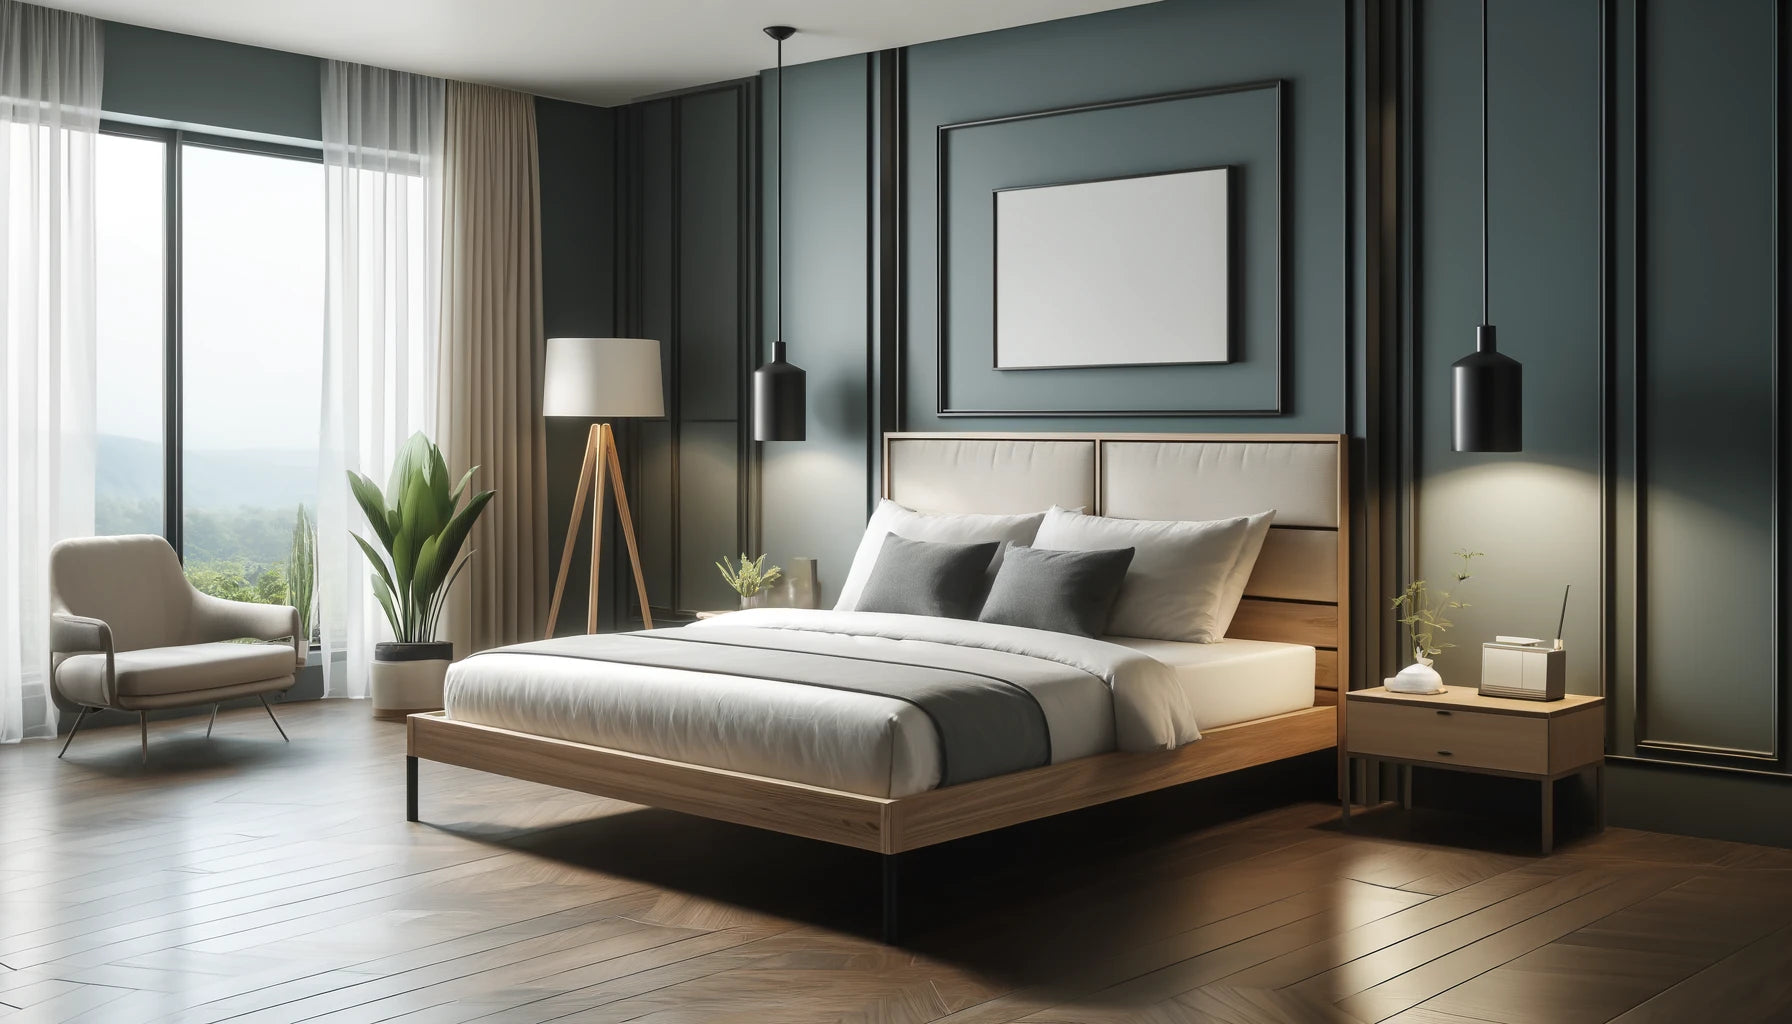 Queen Bed Frame vs King Bed Frame: Which Size Is Right for You?